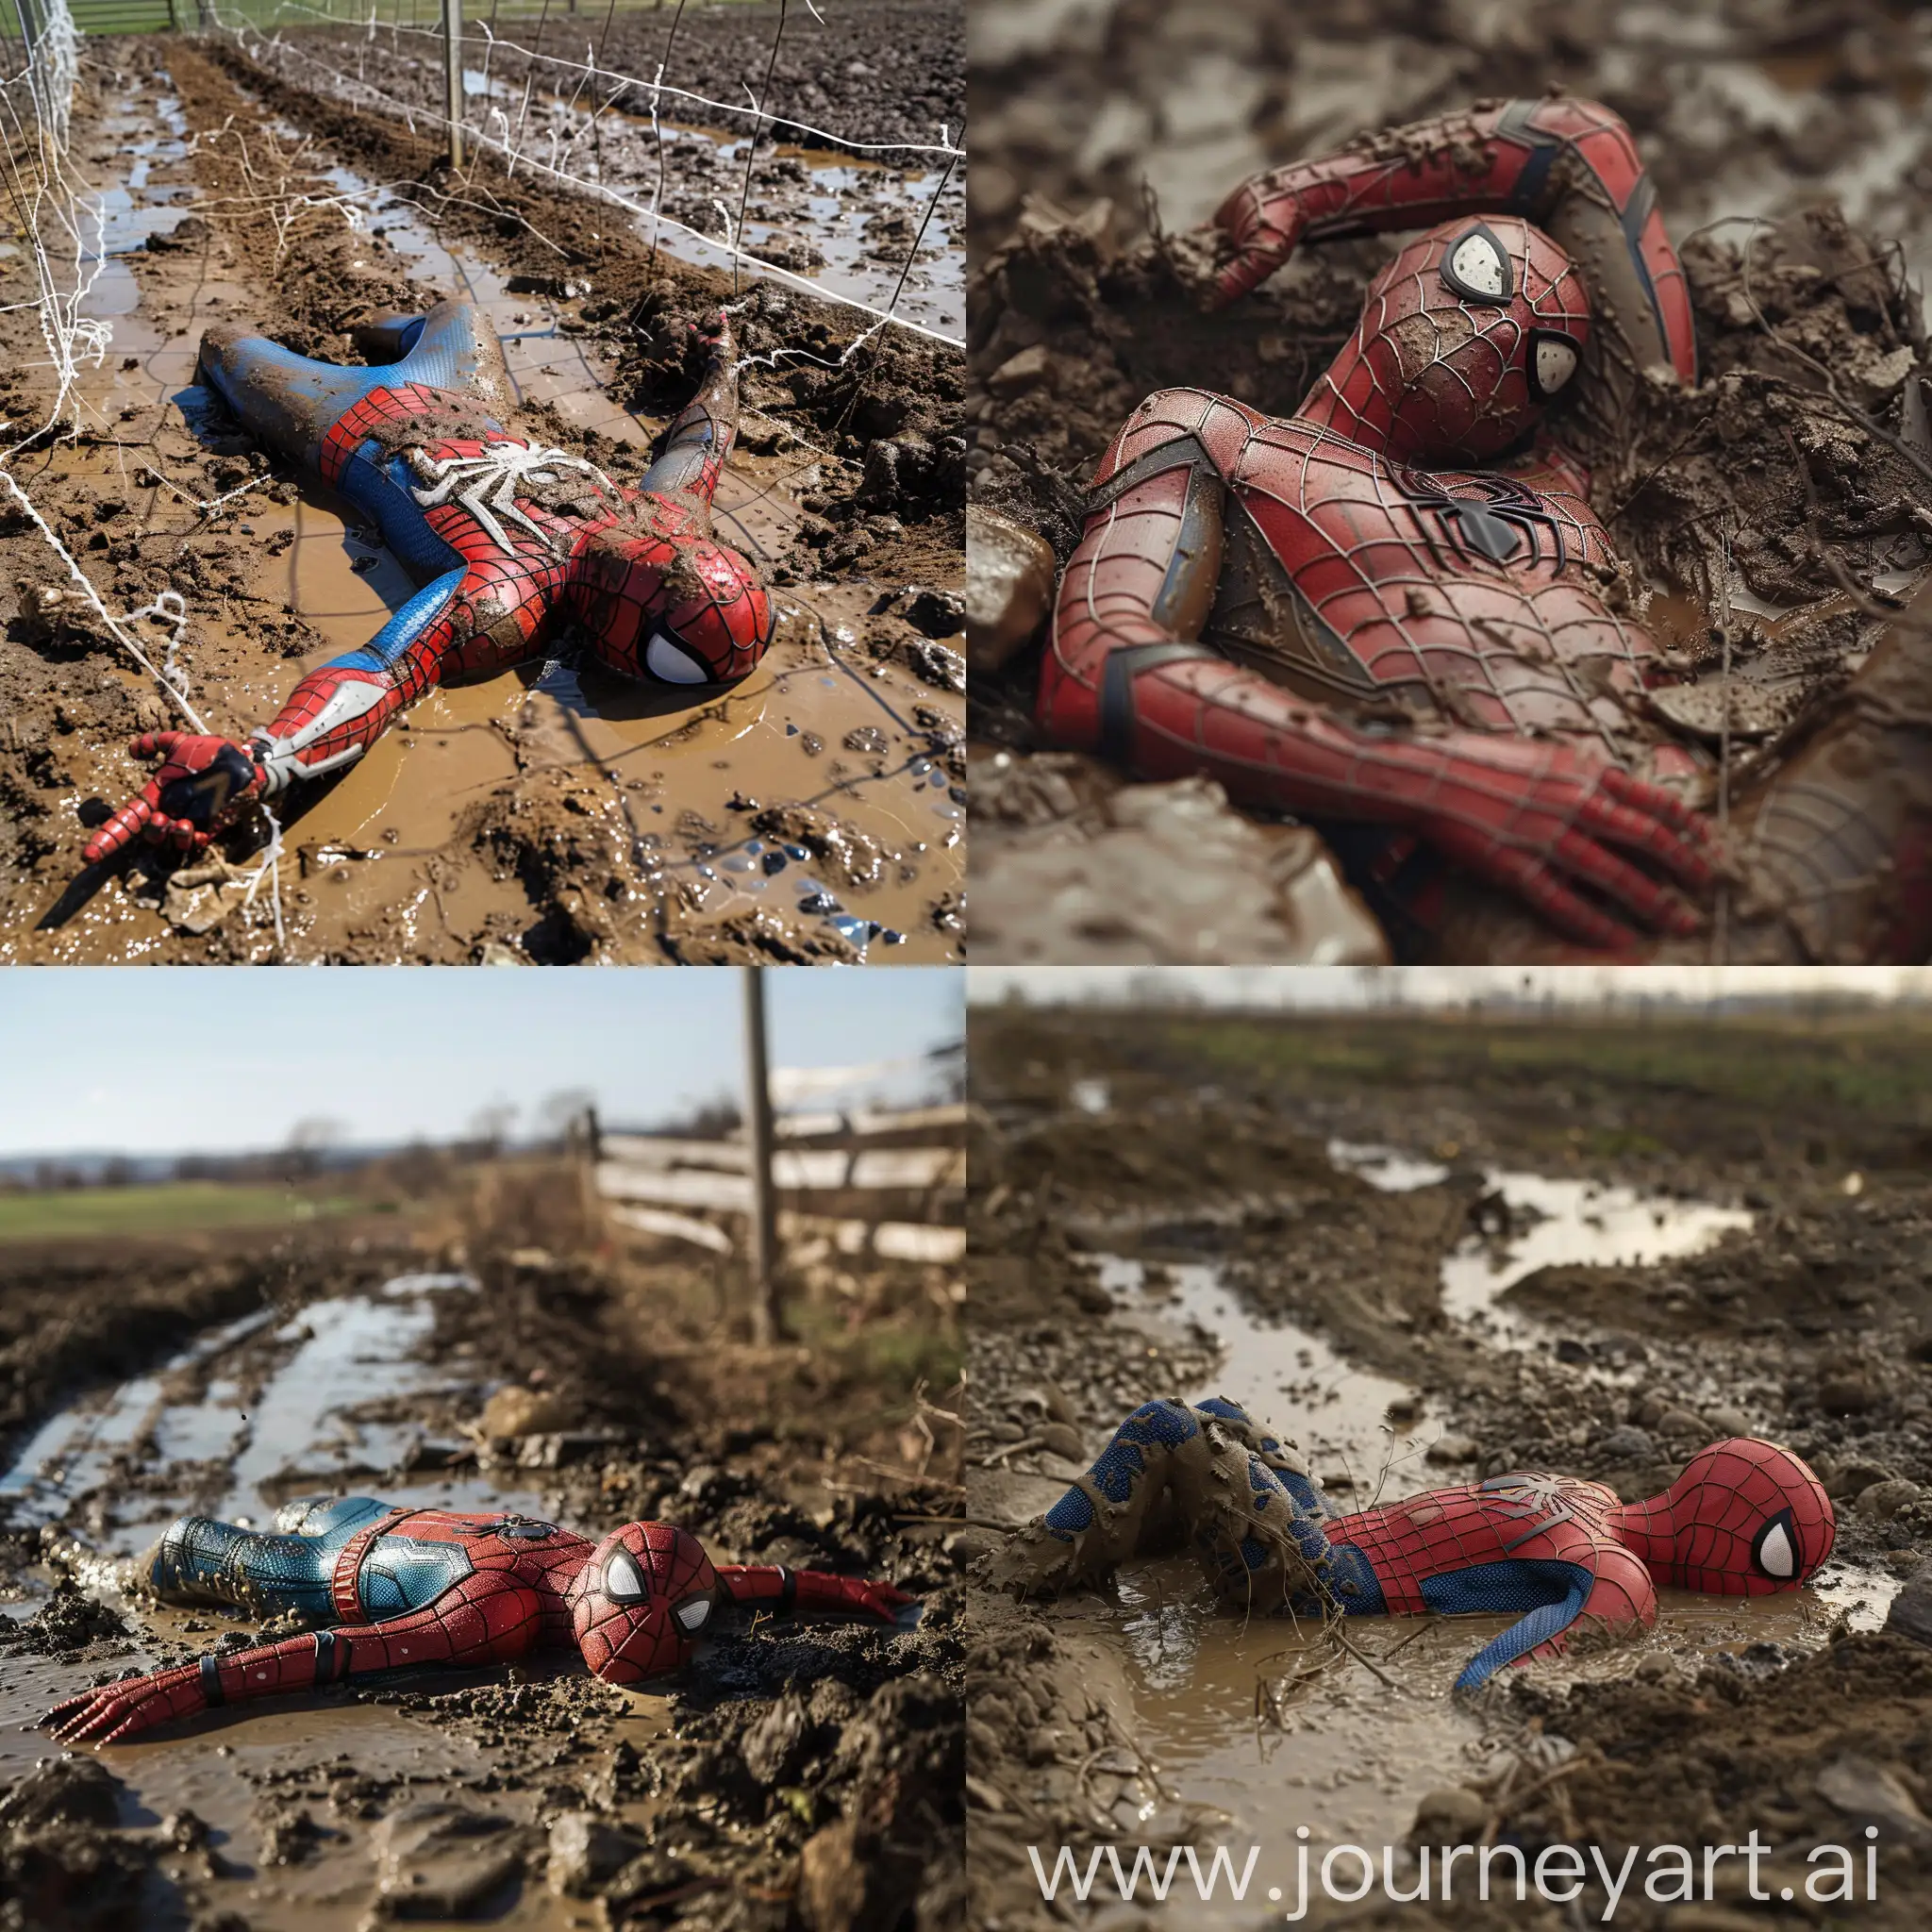 Spiderman-Passed-Out-in-Mud-on-Farm